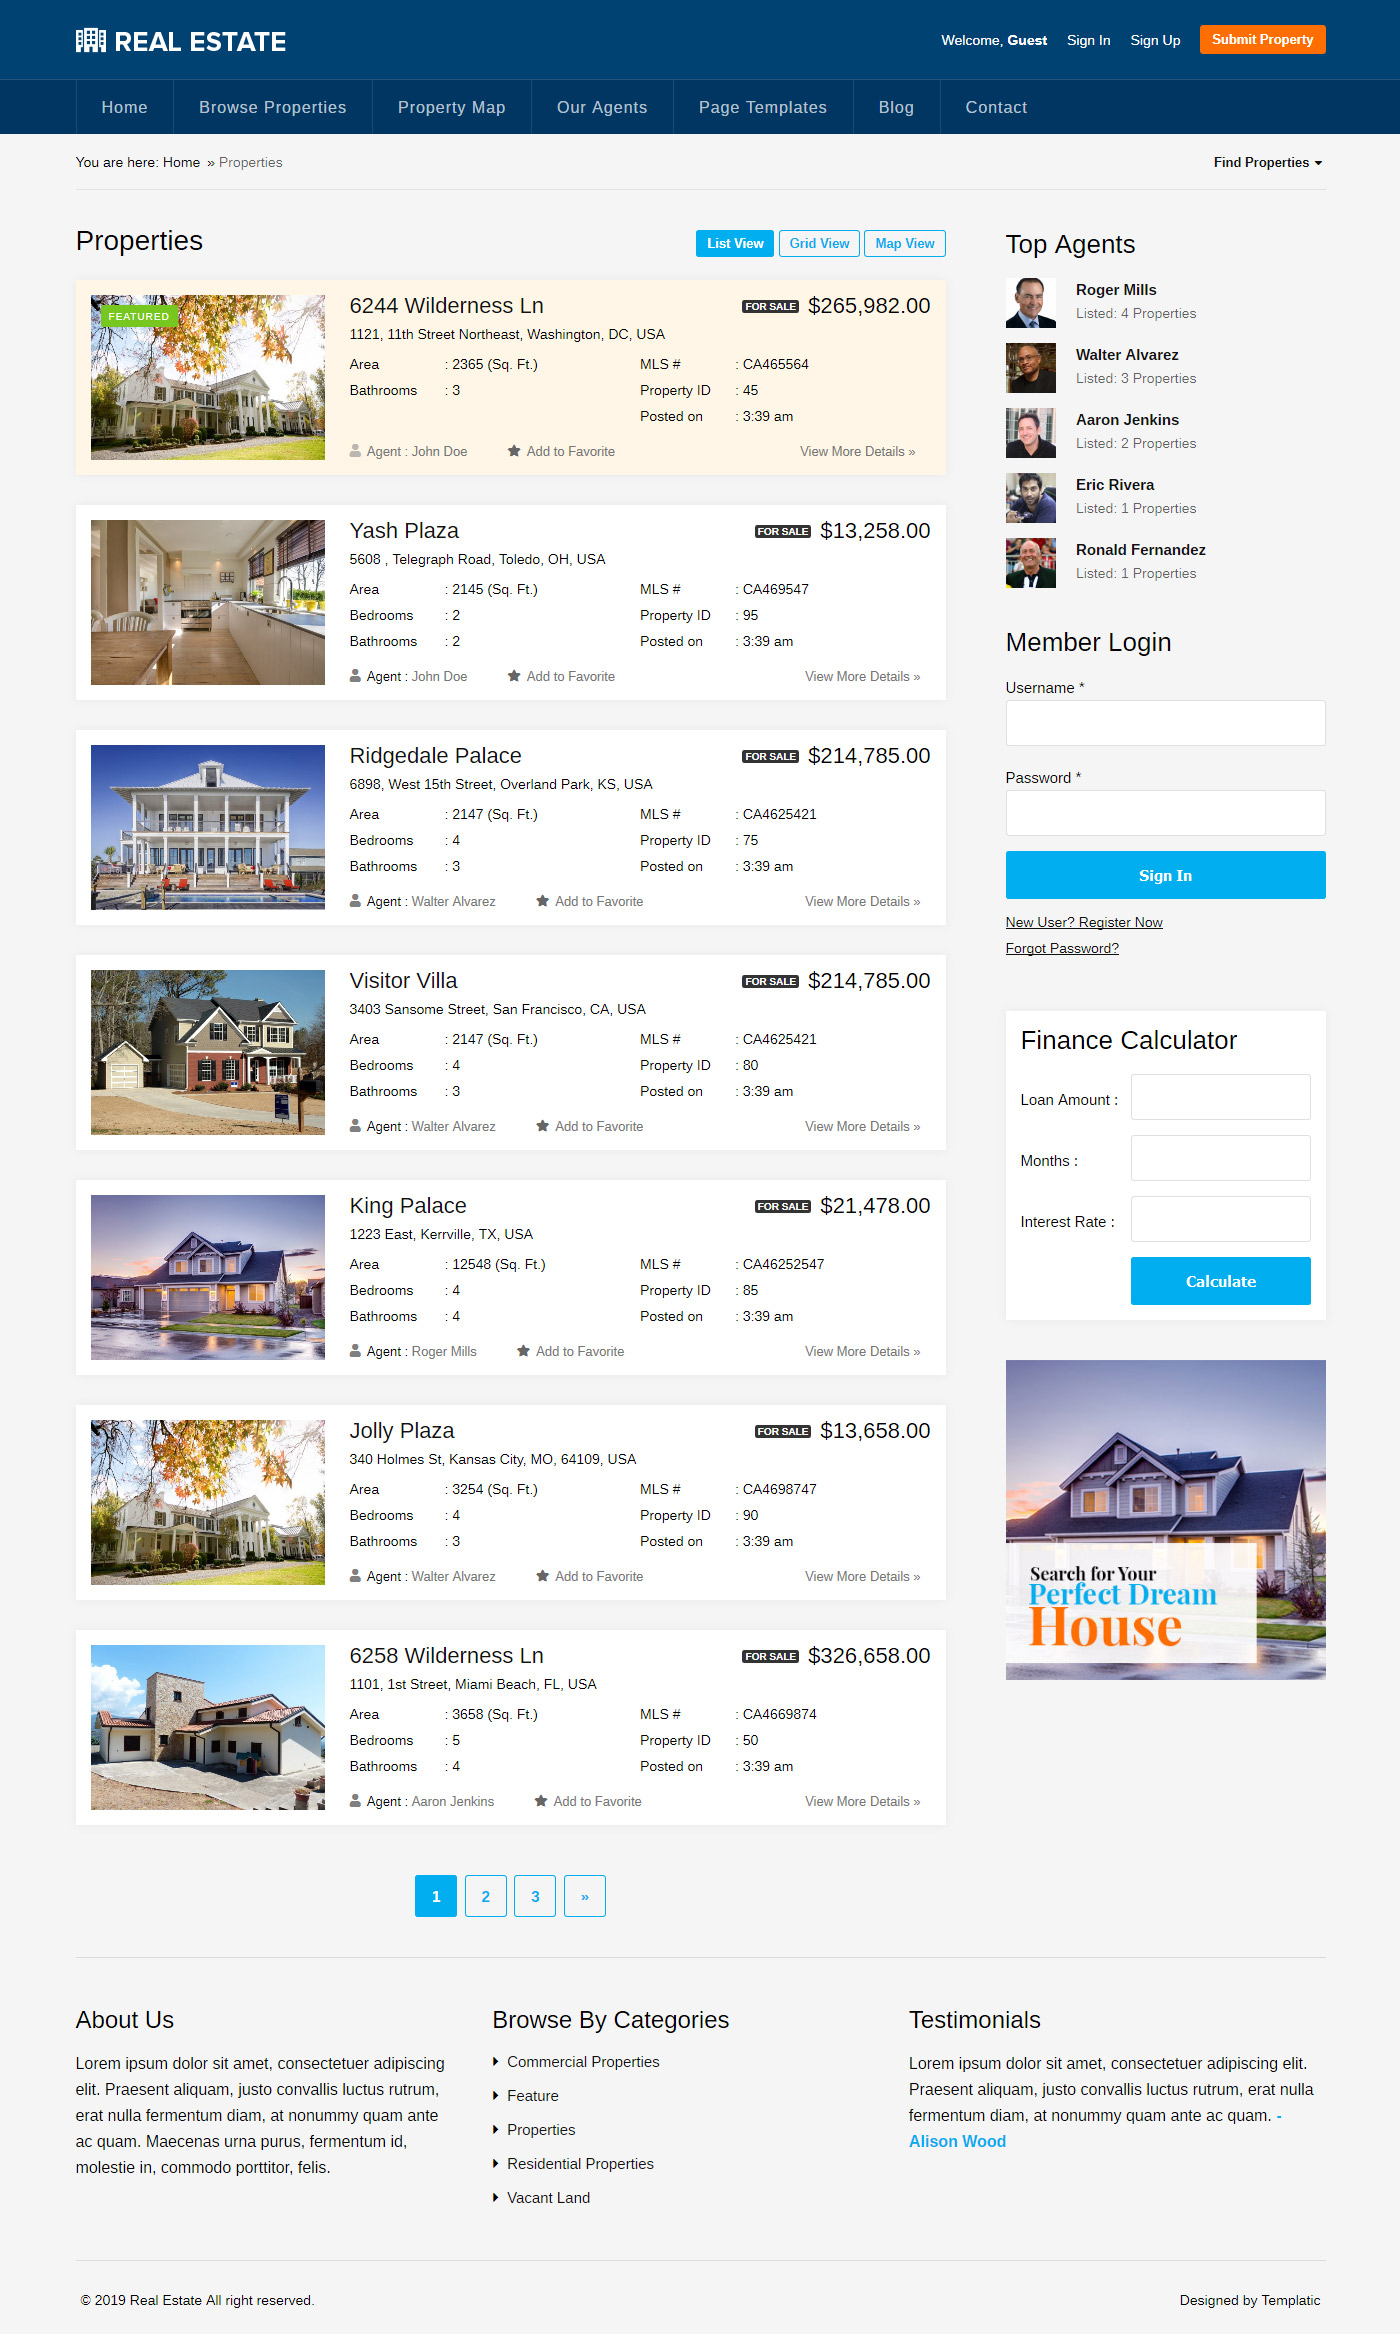 Business Model and Feature Analysis of a Property Listing Website